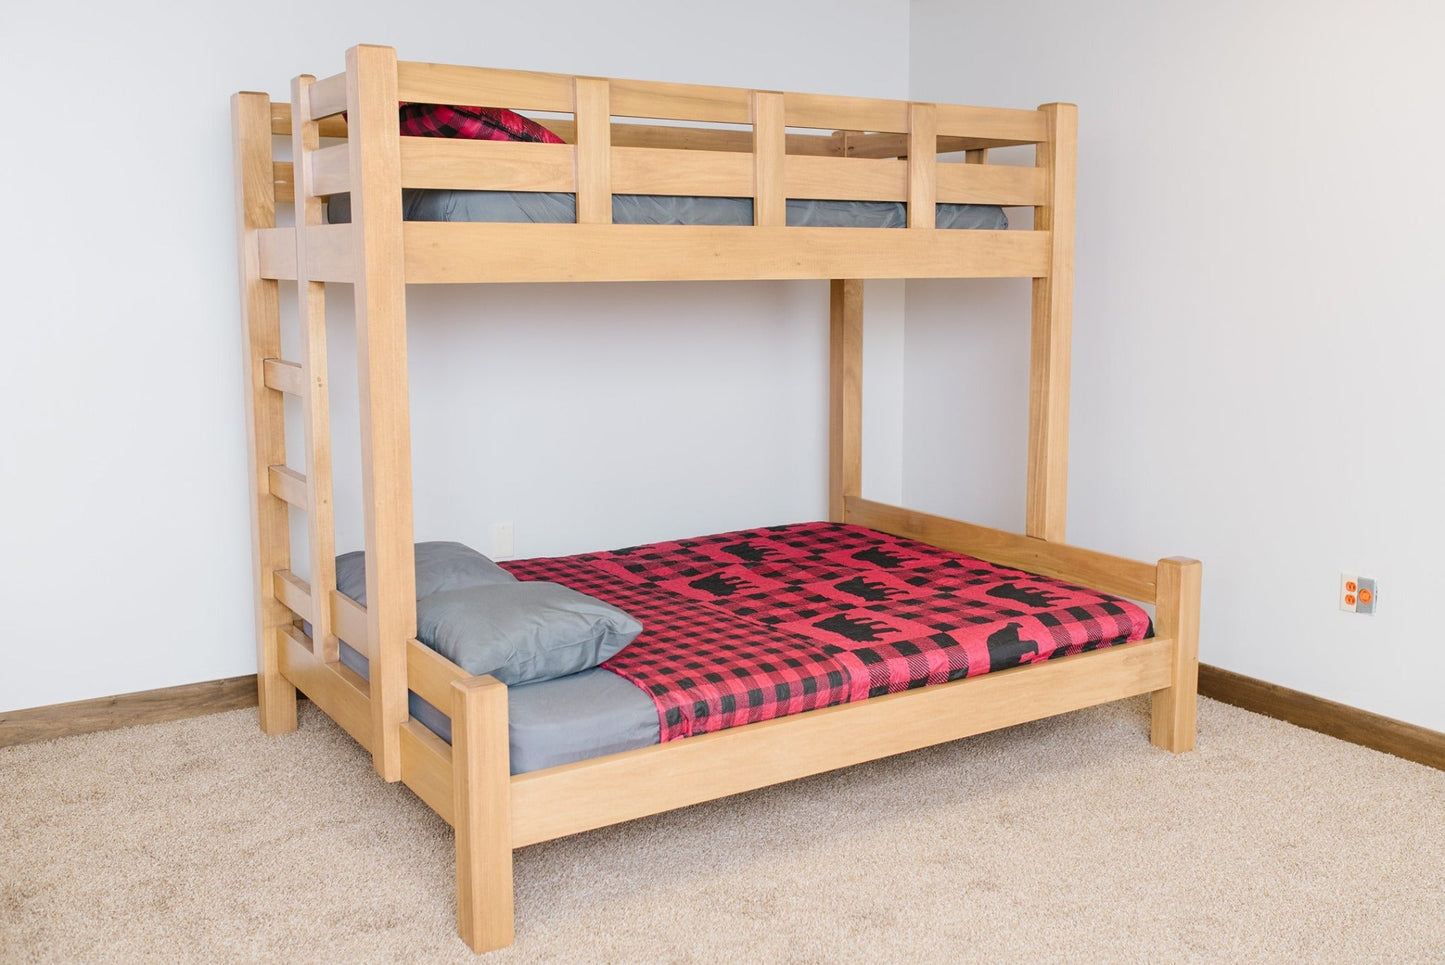 Countryside Bunk Bed